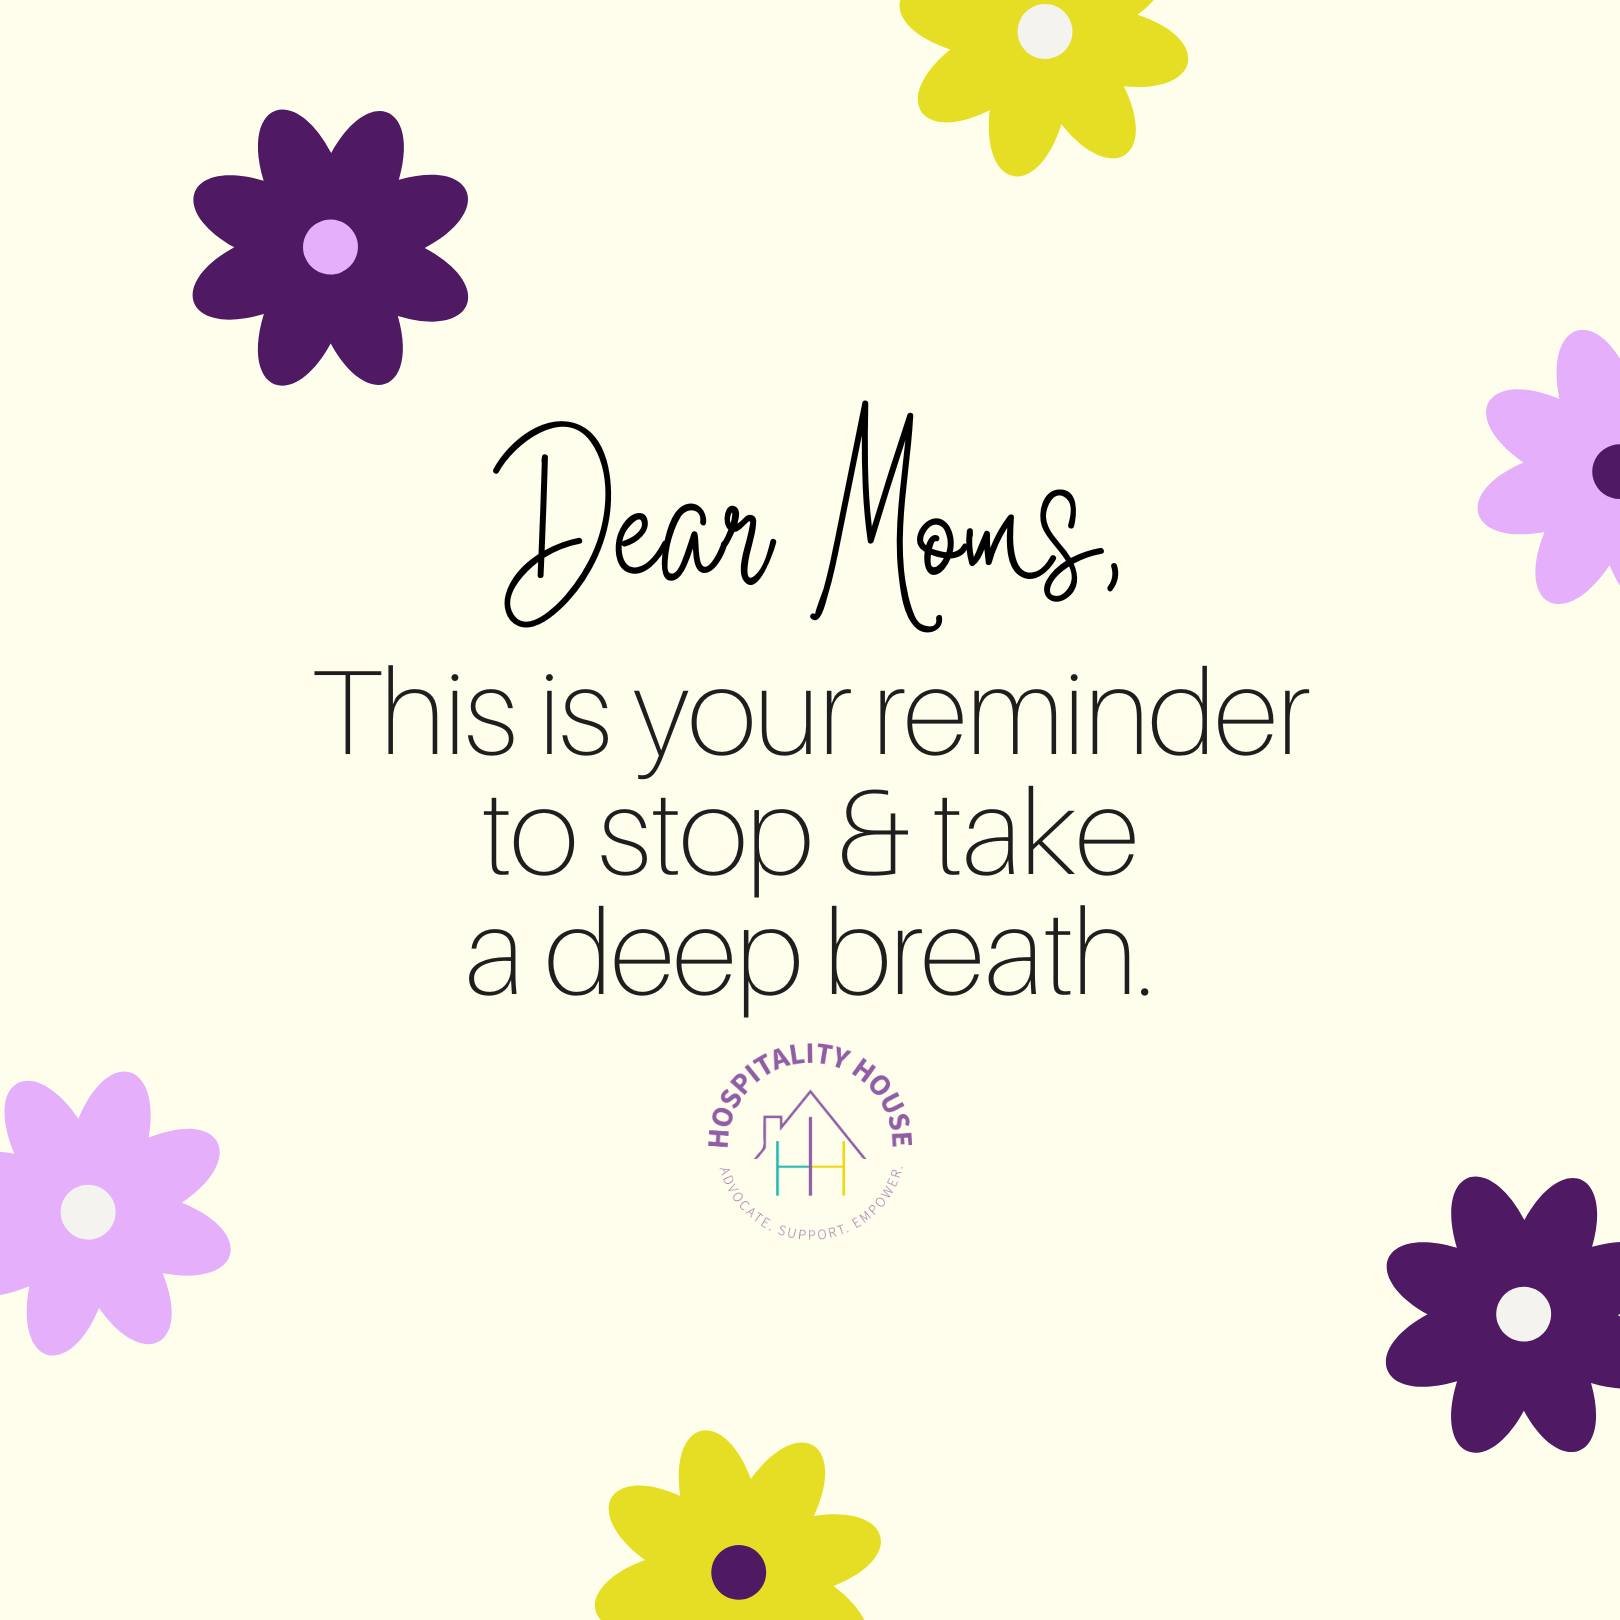 To all the moms out there - we love you and are grateful for you! Be sure to take a deep breath for yourself this month; you deserve it.

...

&iexcl;A todas las madres, las amamos y estamos agradecidas por ustedes! Aseg&uacute;rate de tomar una resp